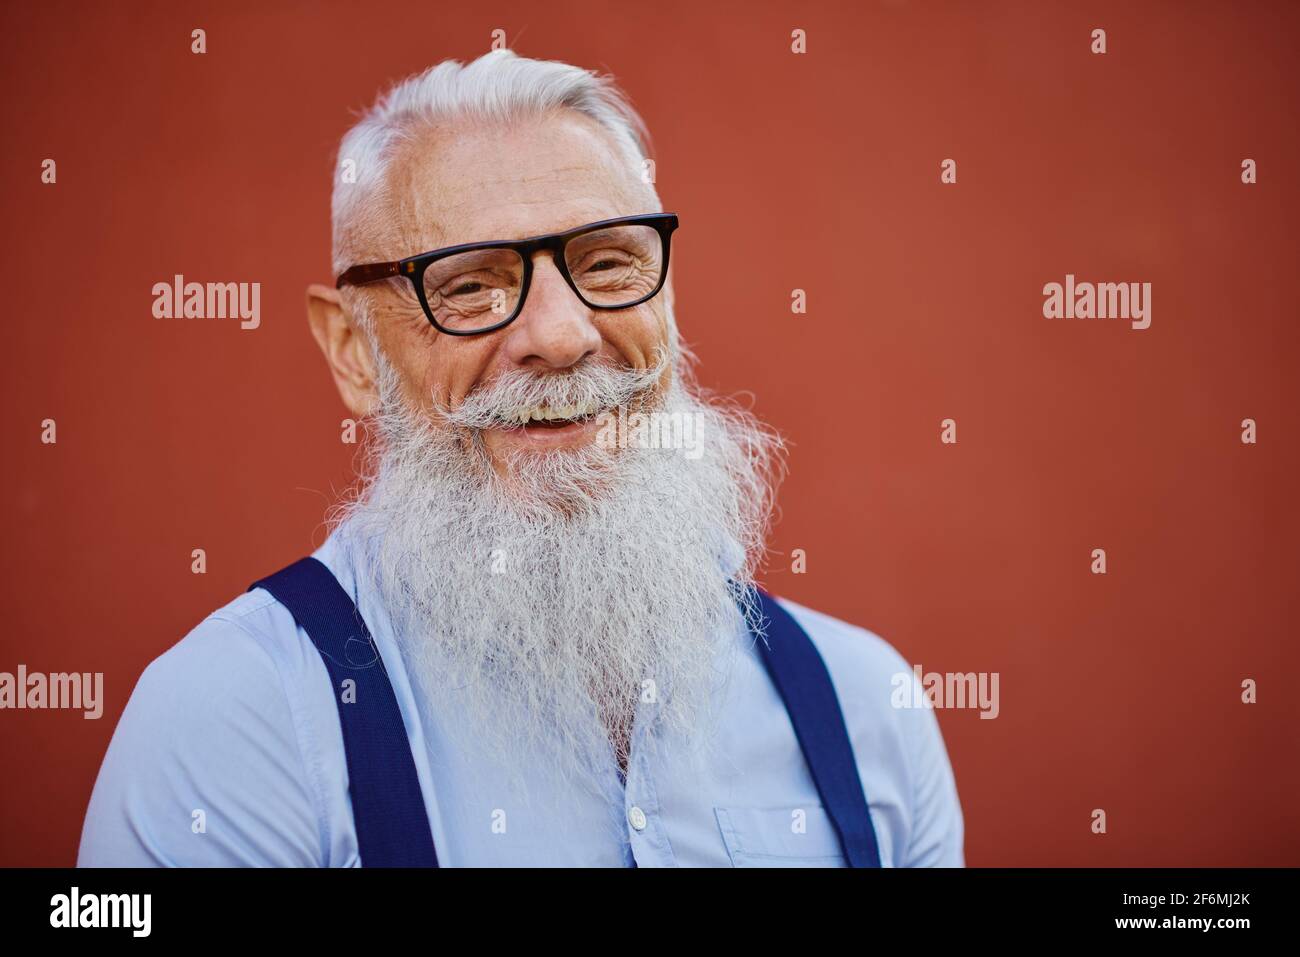 Cheerful hipster man in welcoming mood posing on red wall background - Fashionable person in casual fashion clothes - Happy elderly lifestyle concept Stock Photo